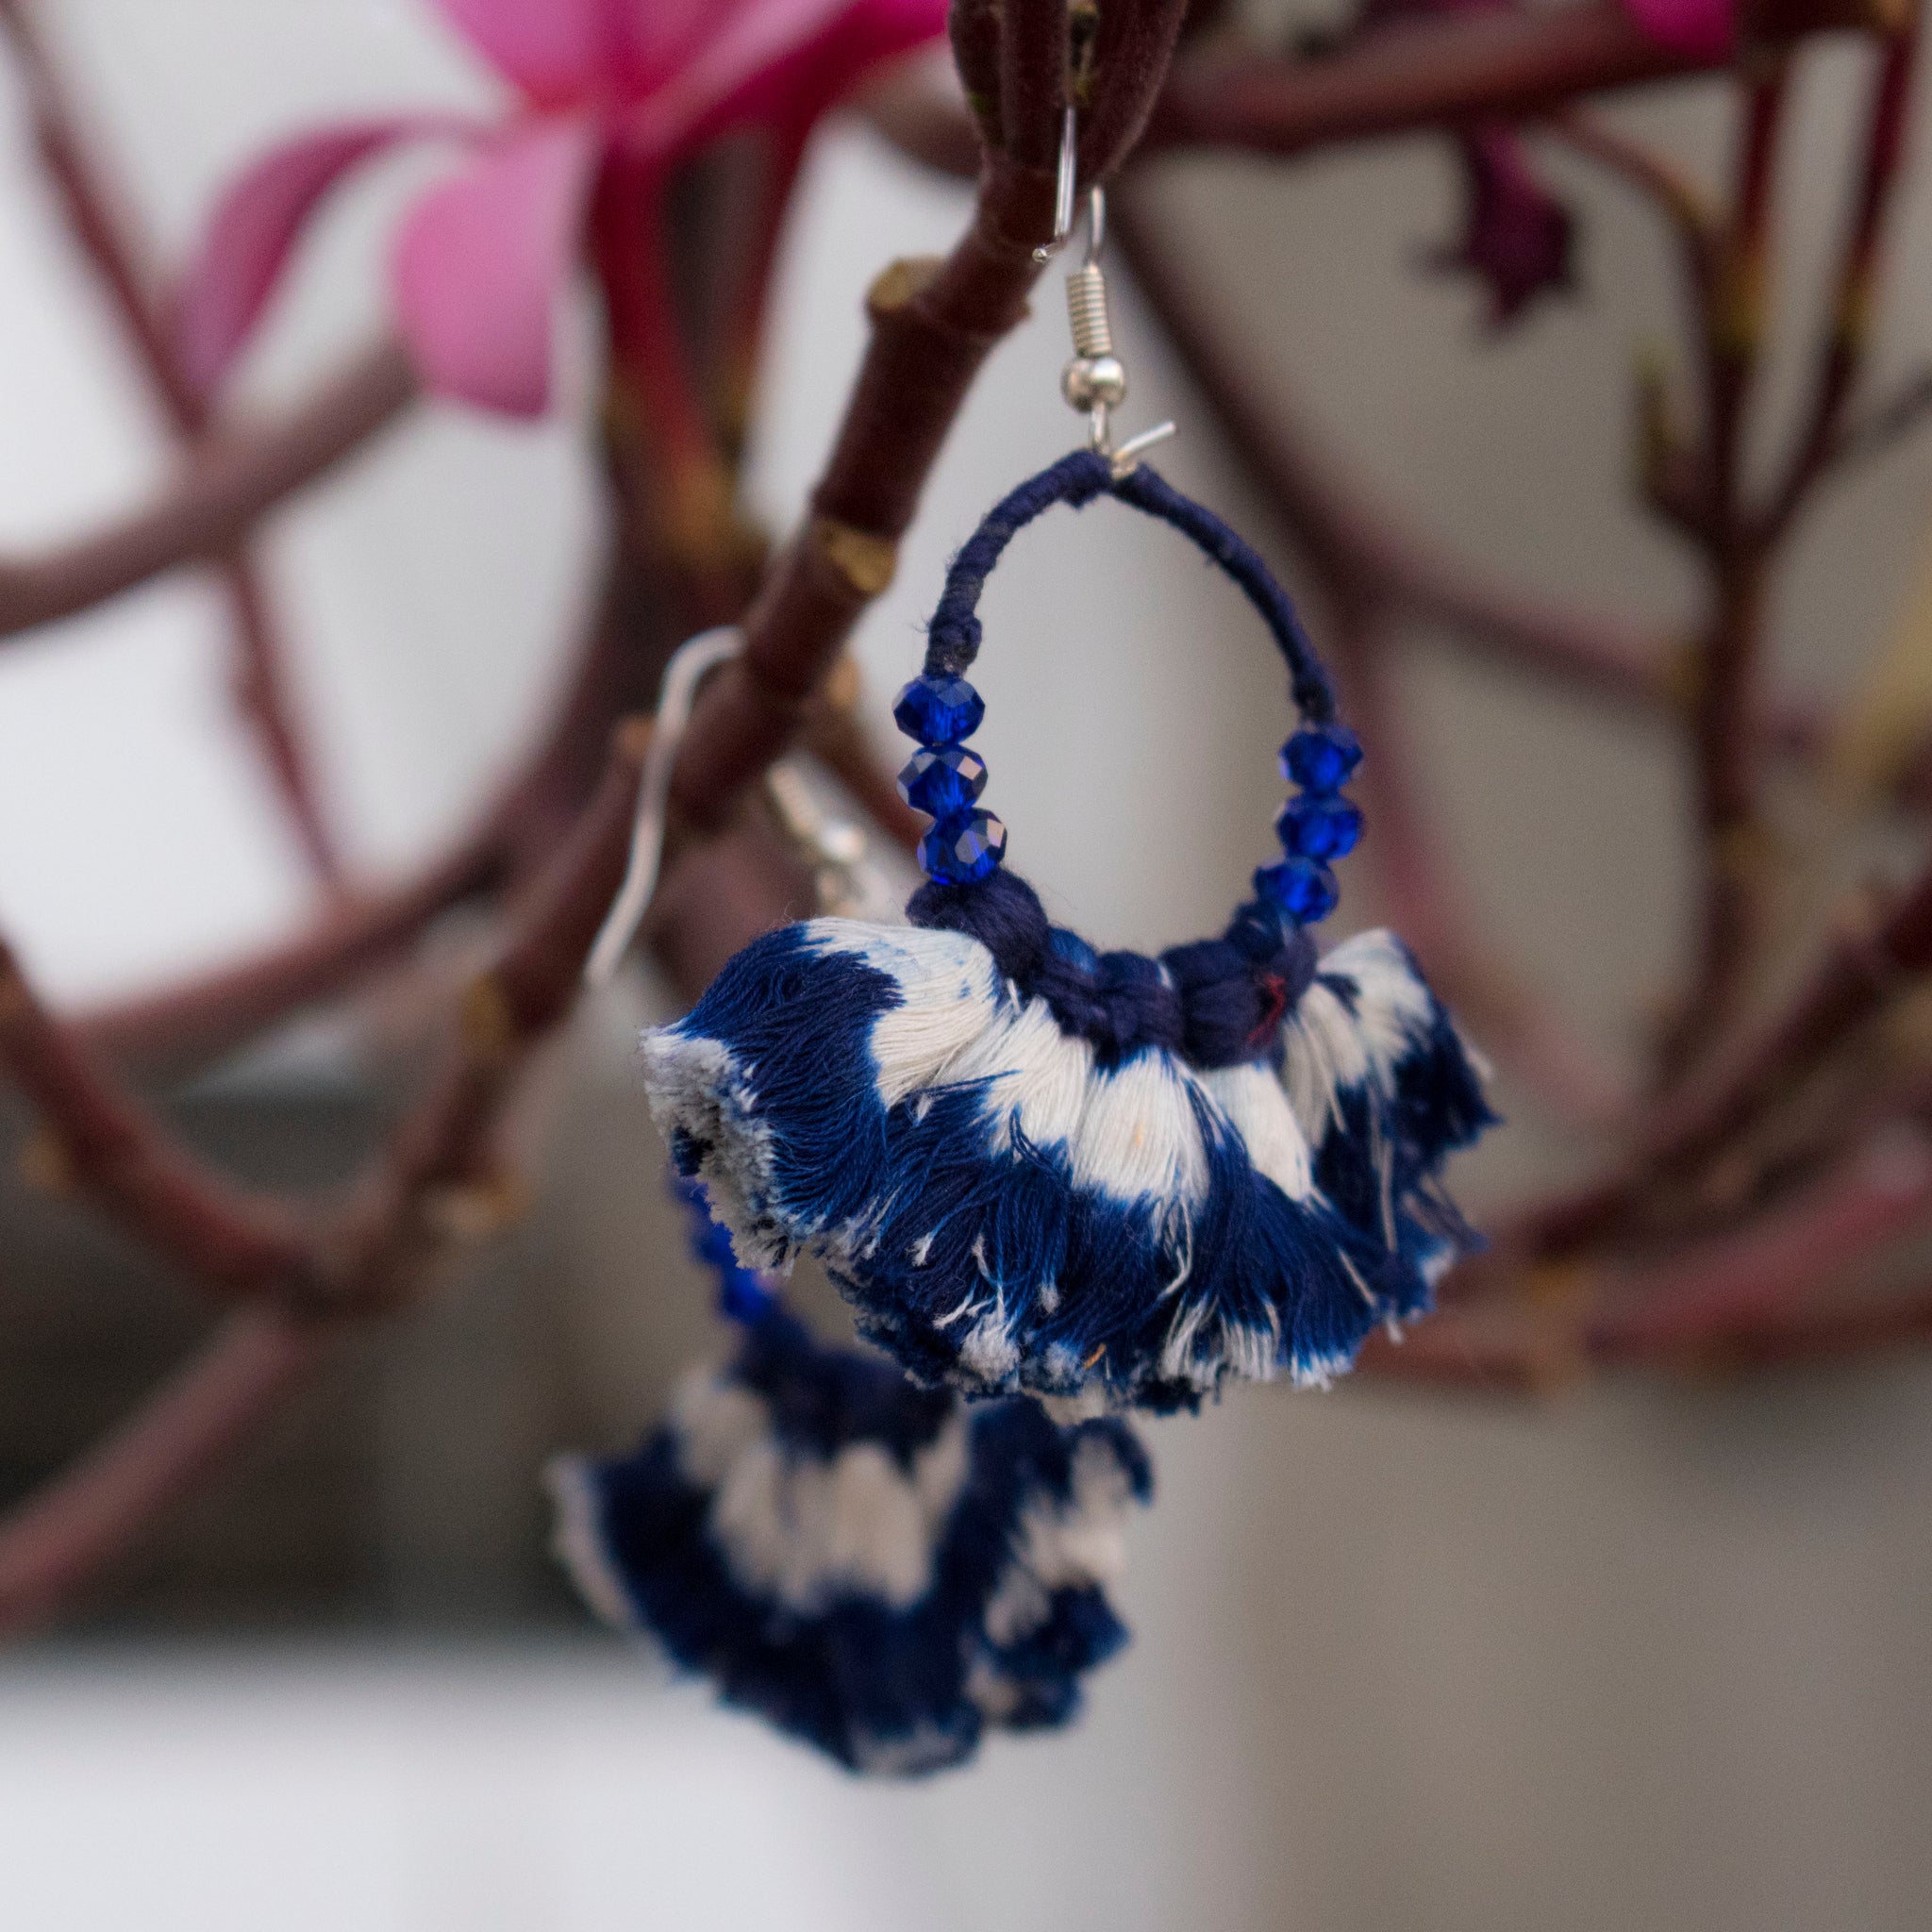 Earring embellished with navy blue ikat tassels